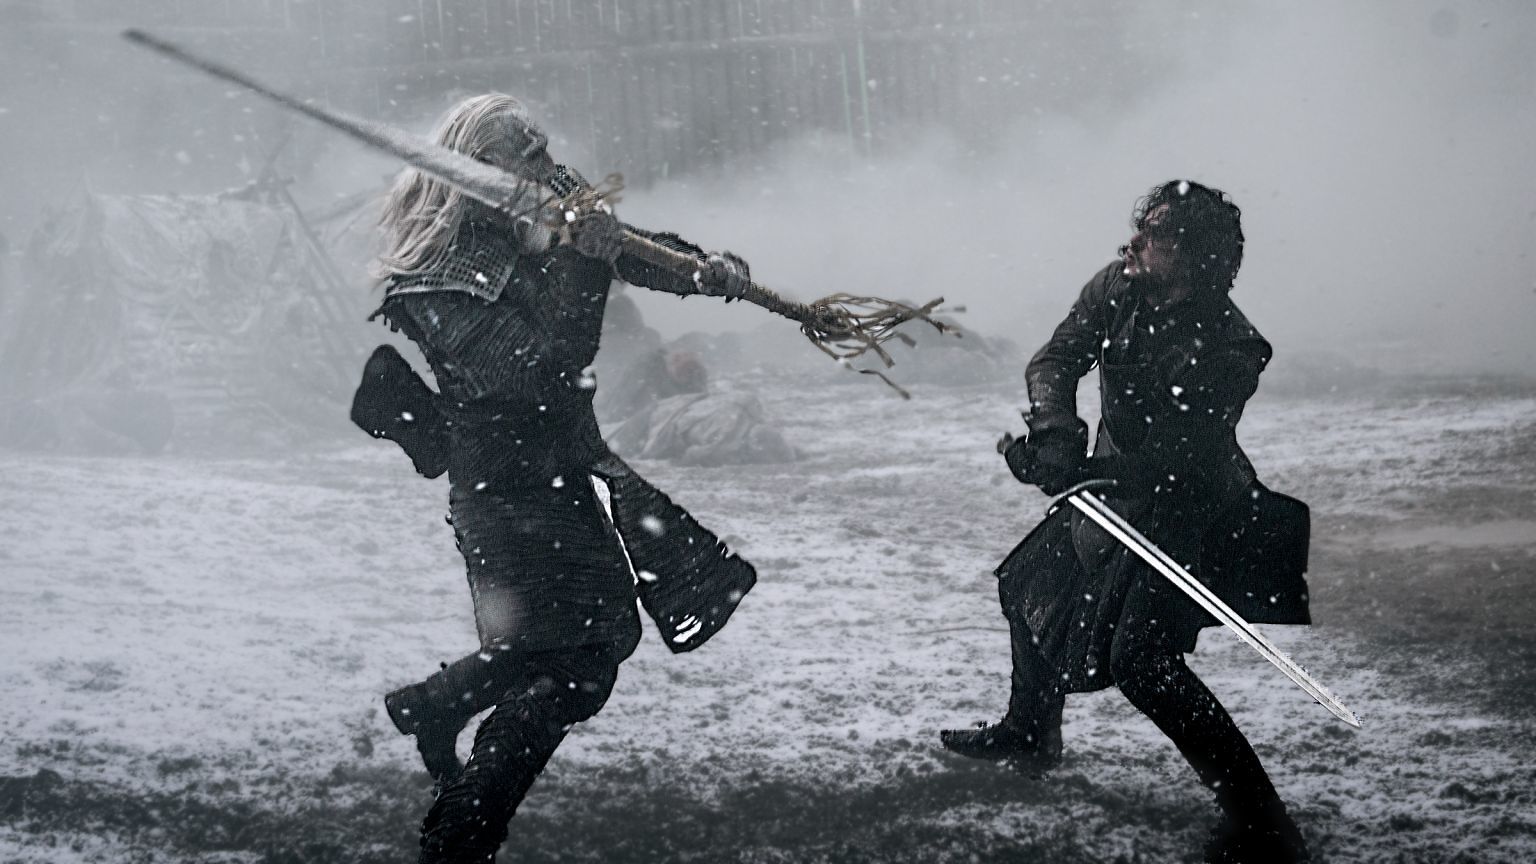 The Battle of Winterfell Game of Thrones